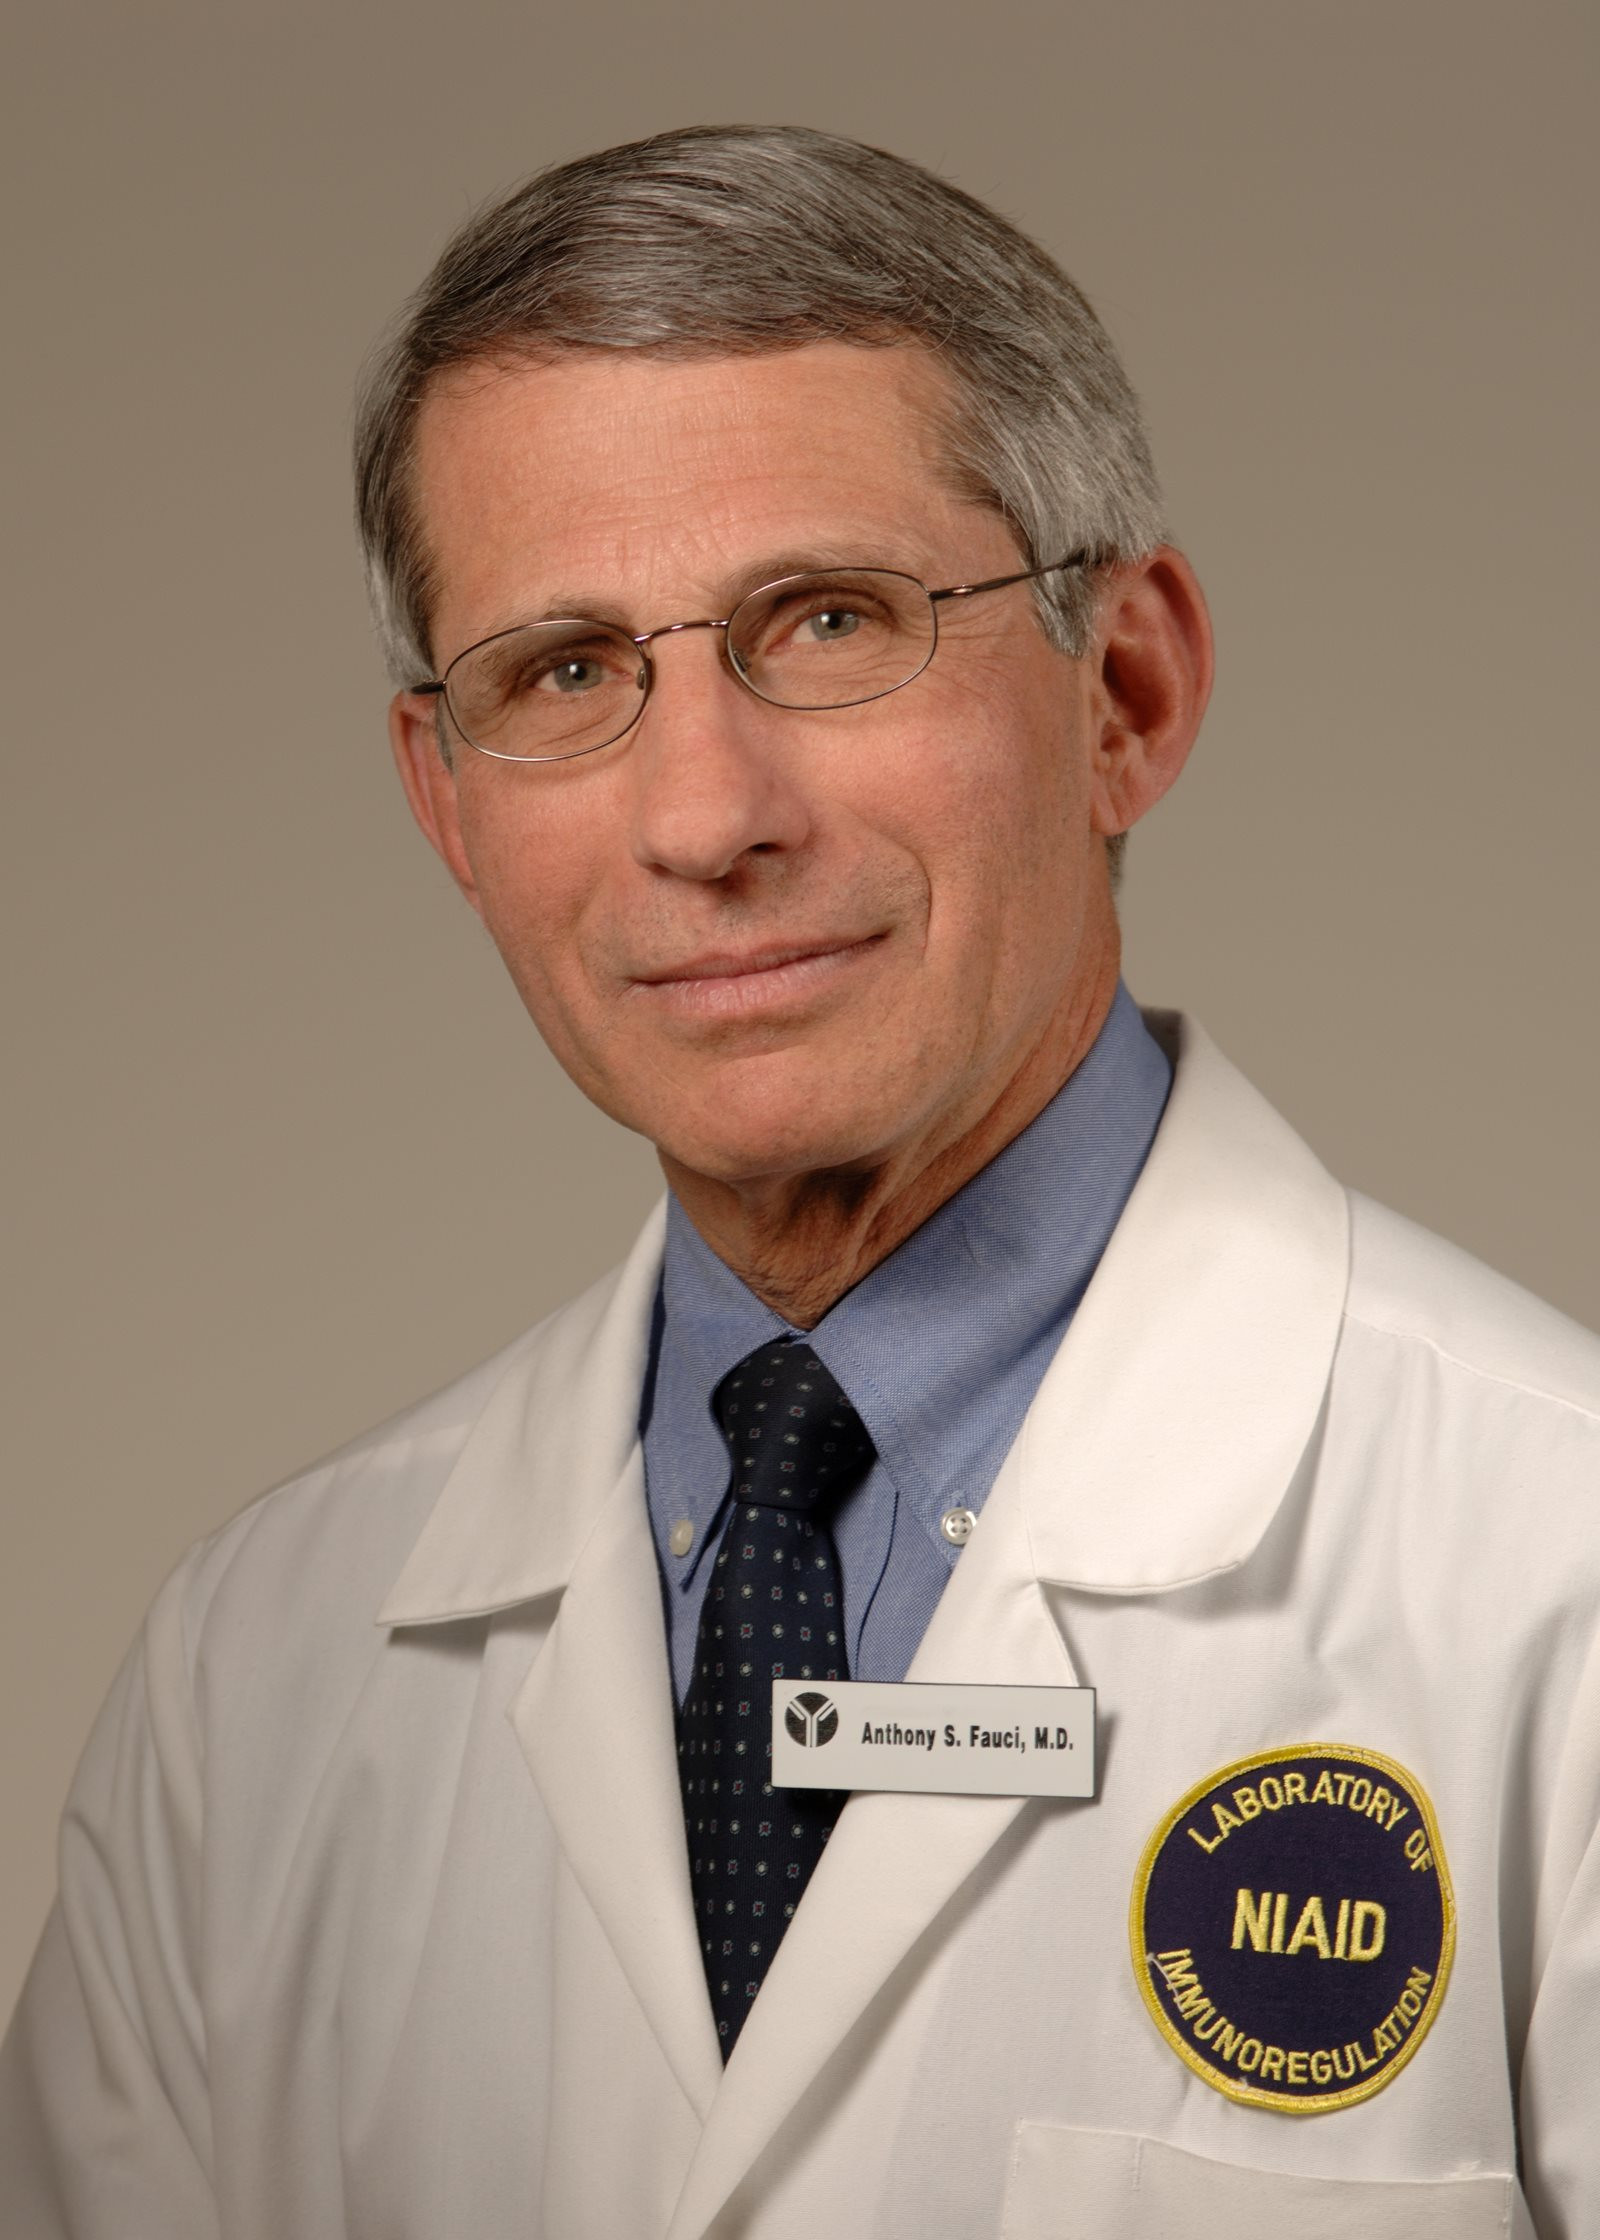 anthony_s._fauci-_m.d.-_niaid_director_-26759498706-.jpg